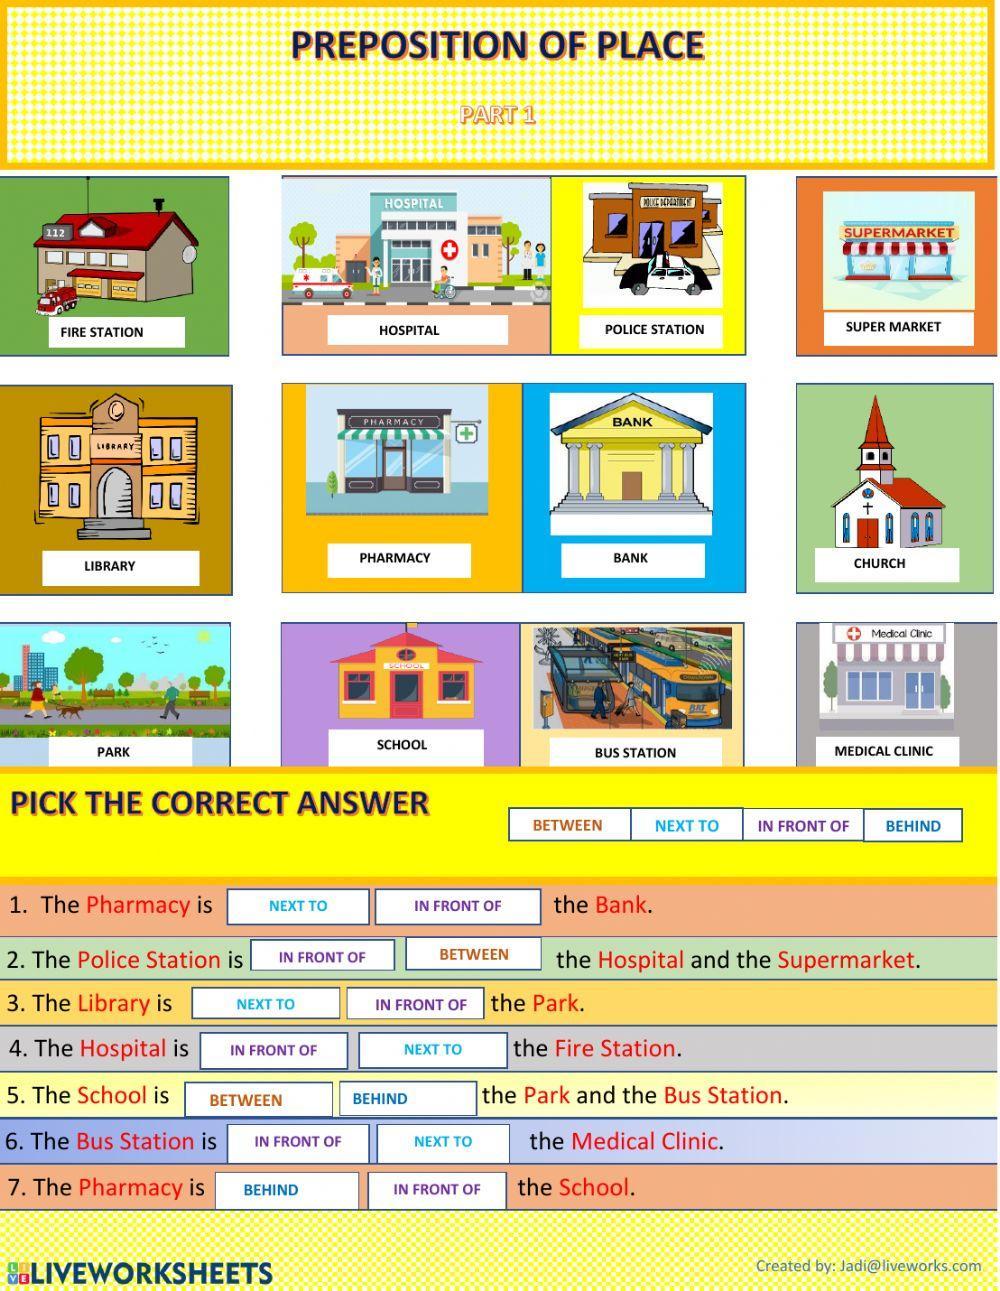 Prepositions of Place part 1